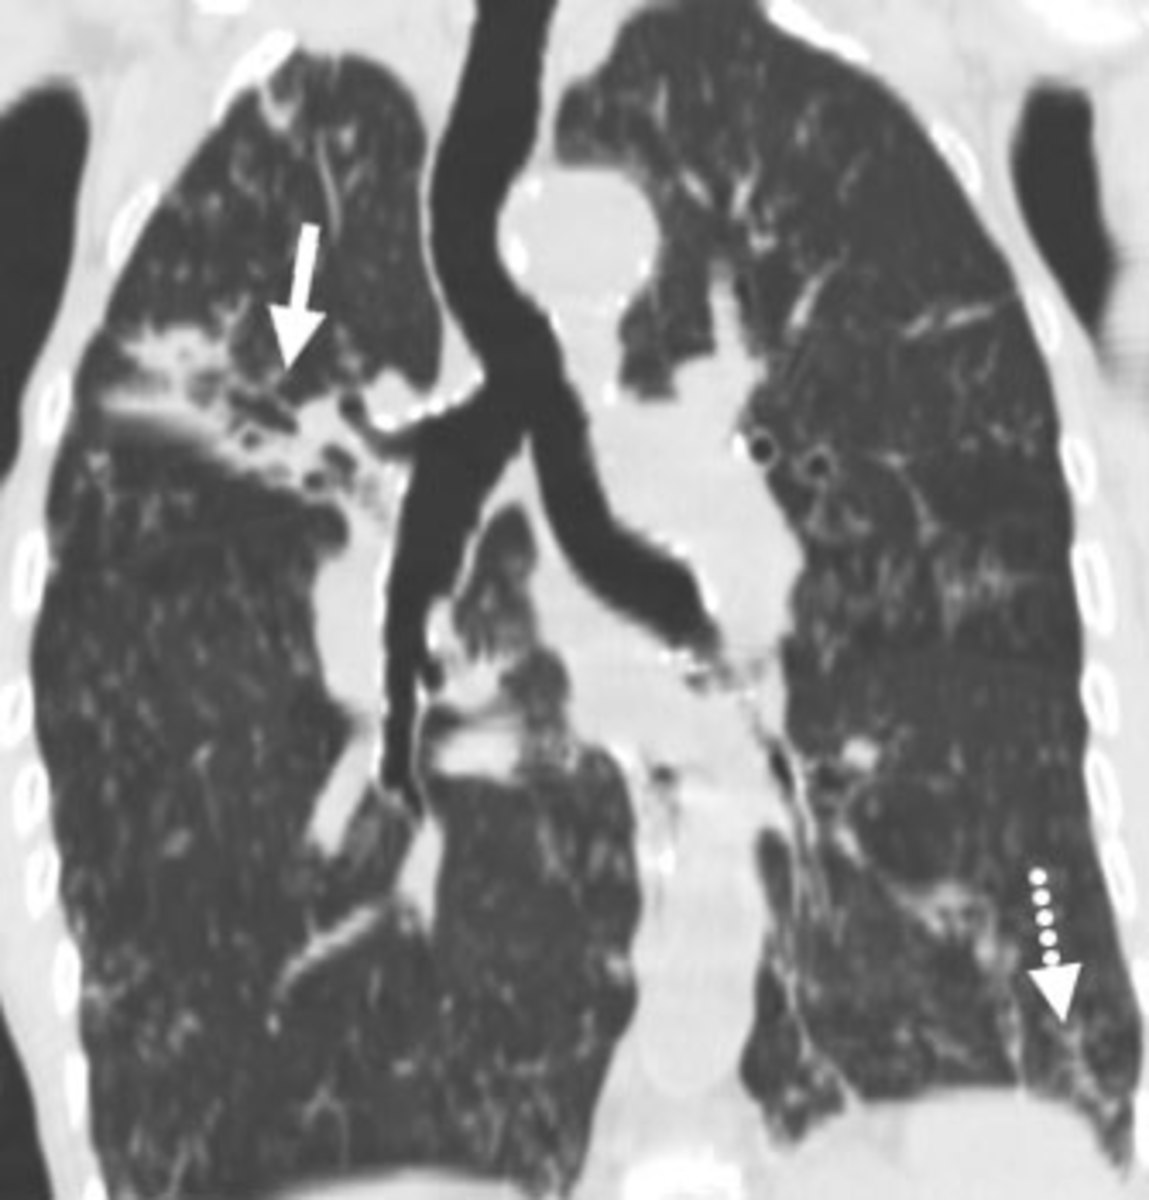 83 year old lady with a chronic cough. Coronal reformat CT scan through the airways demonstrates extensive bronchiectasis, tree-in-bud nodules (dashed arrow) and right upper lobe segmental atelectasis (solid arrow) secondary to MAC